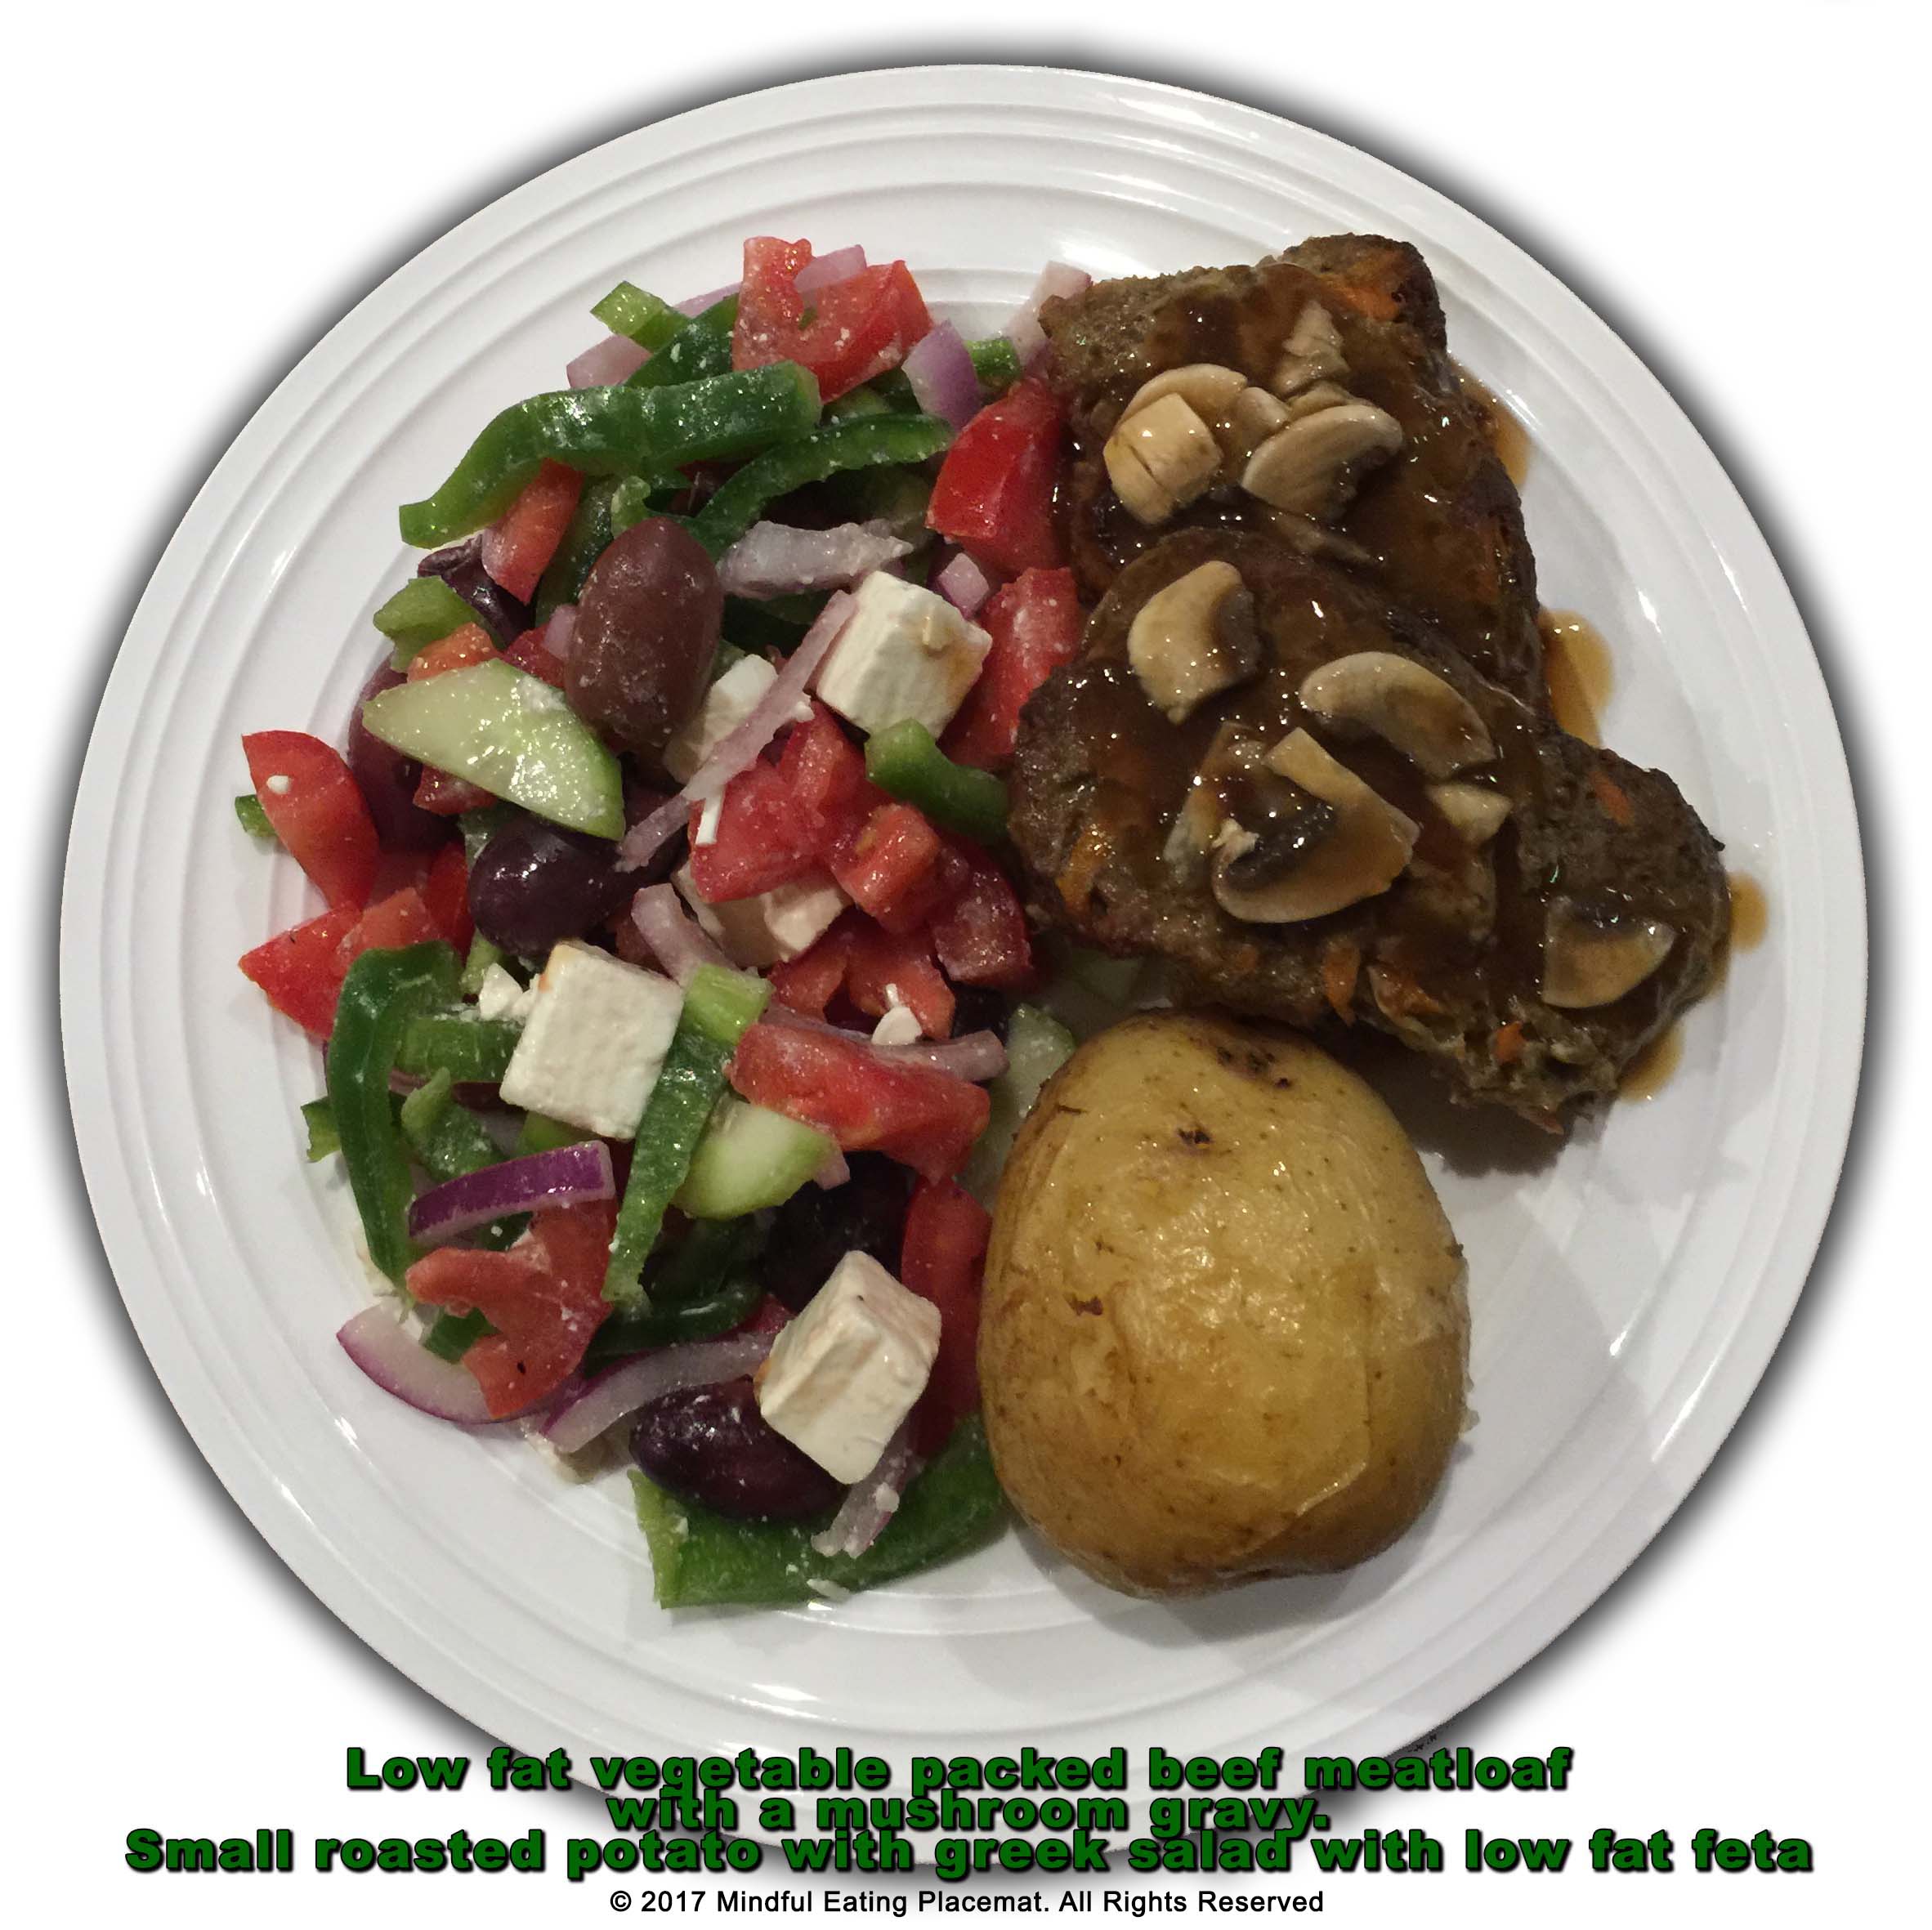 Beef meatloaf with a potato and greek salad